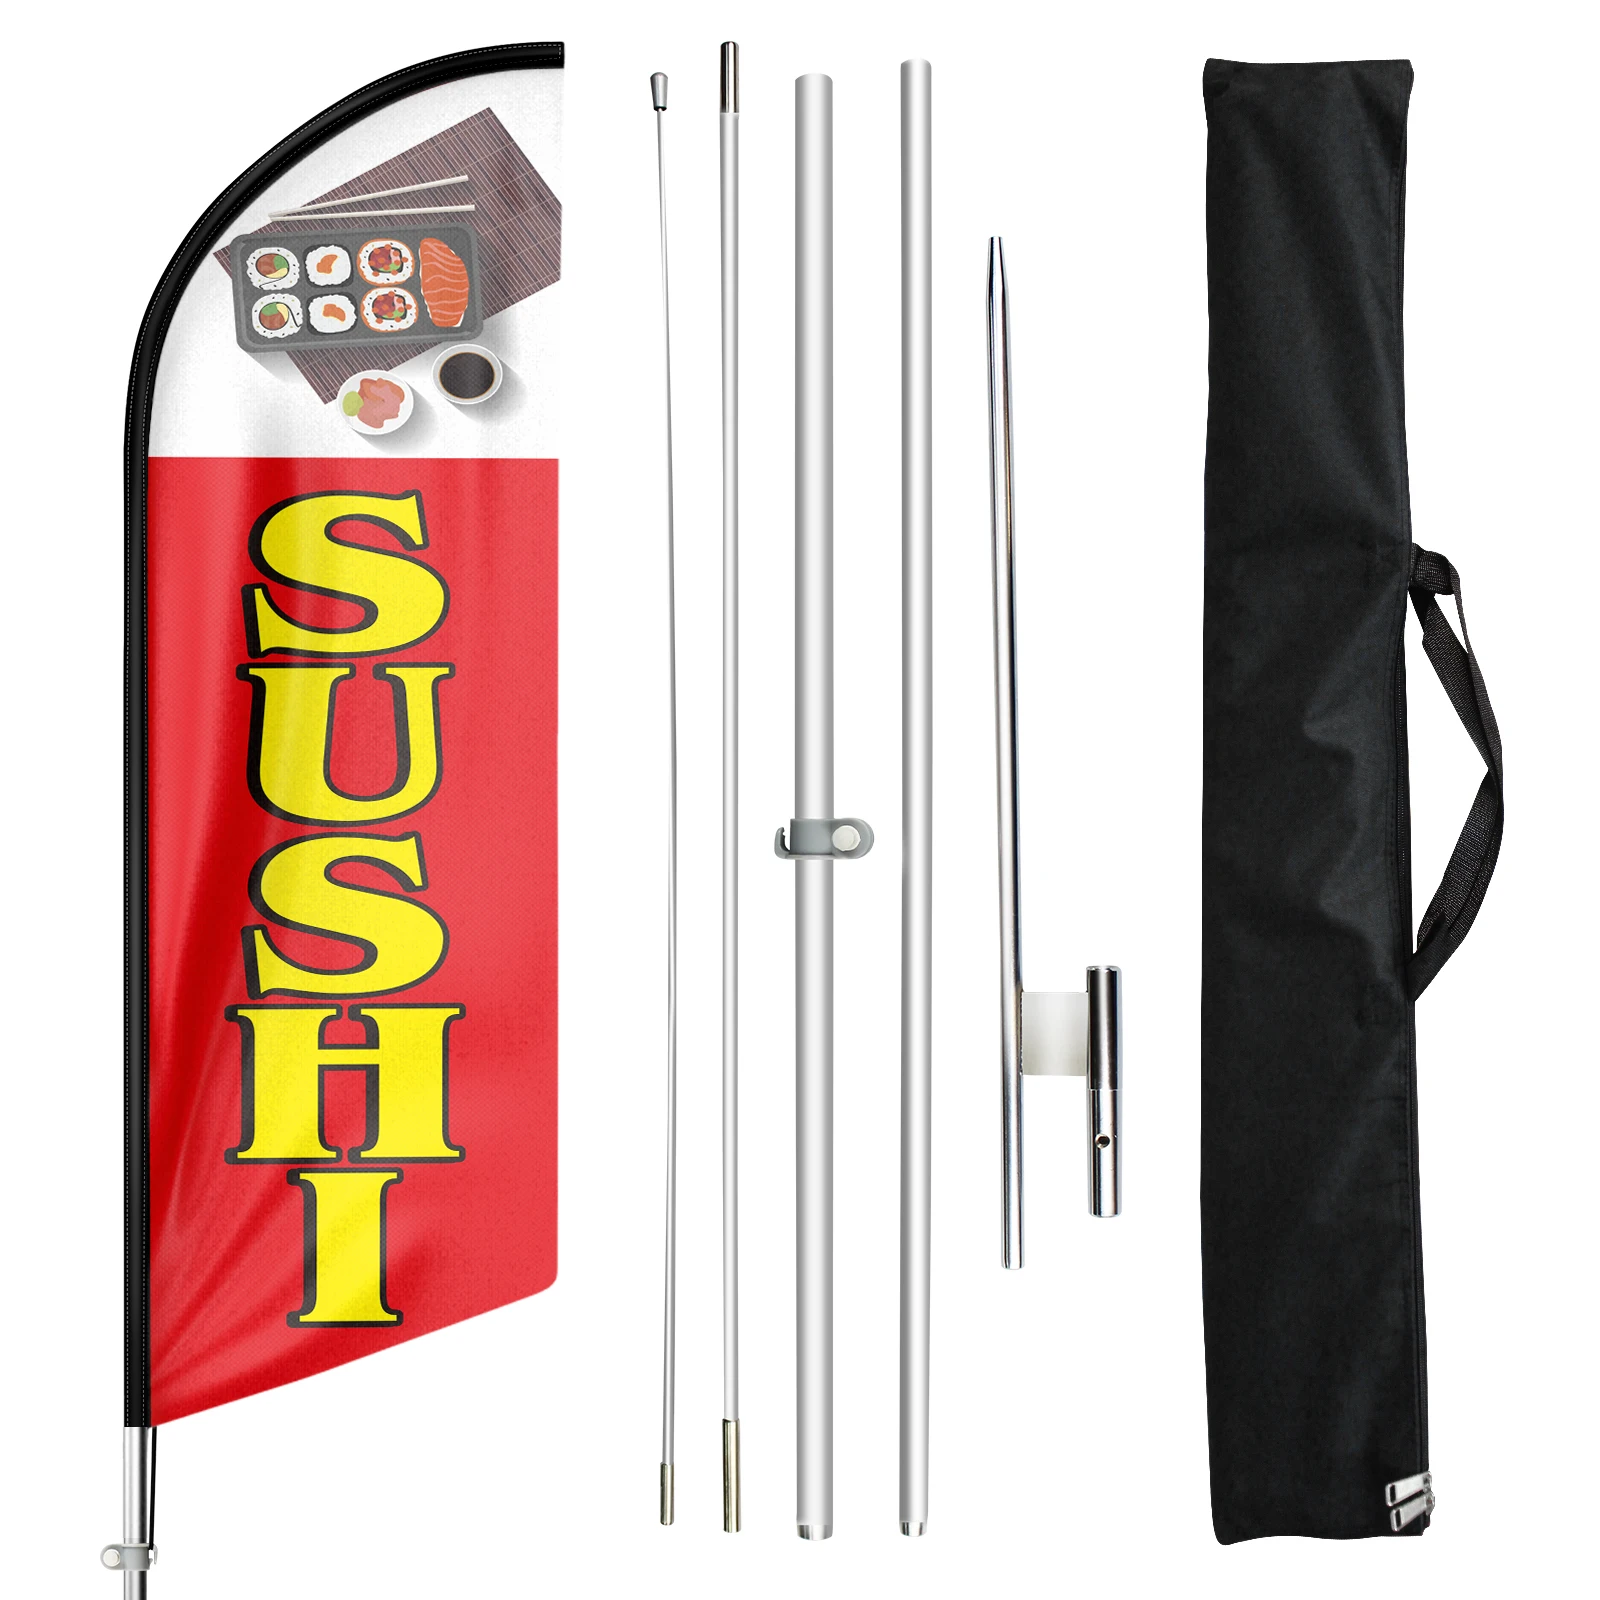 menudo Home Style Cooking Now Open King Swooper Feather Flag Sign Kit with Pole and Ground Spike Pack of 3